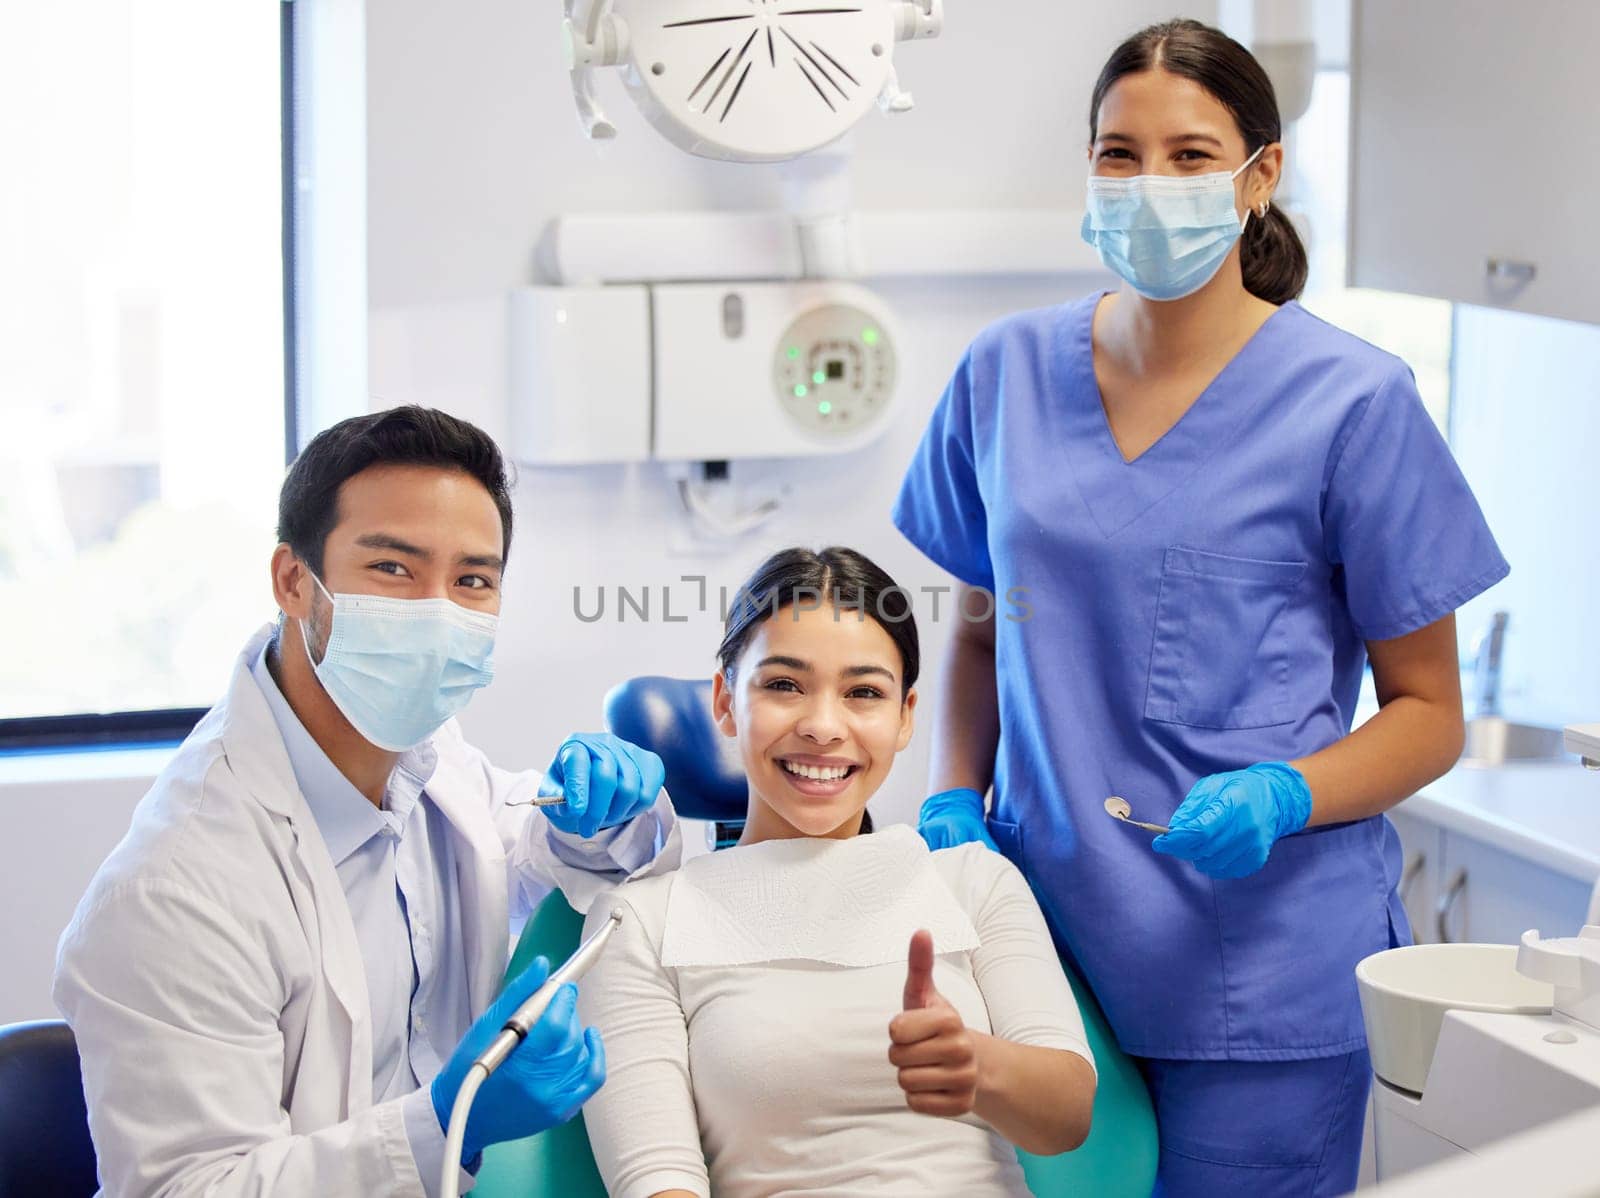 Nothing says good job like a great smile. Portrait of a young woman showing thumbs up while visiting the dentist